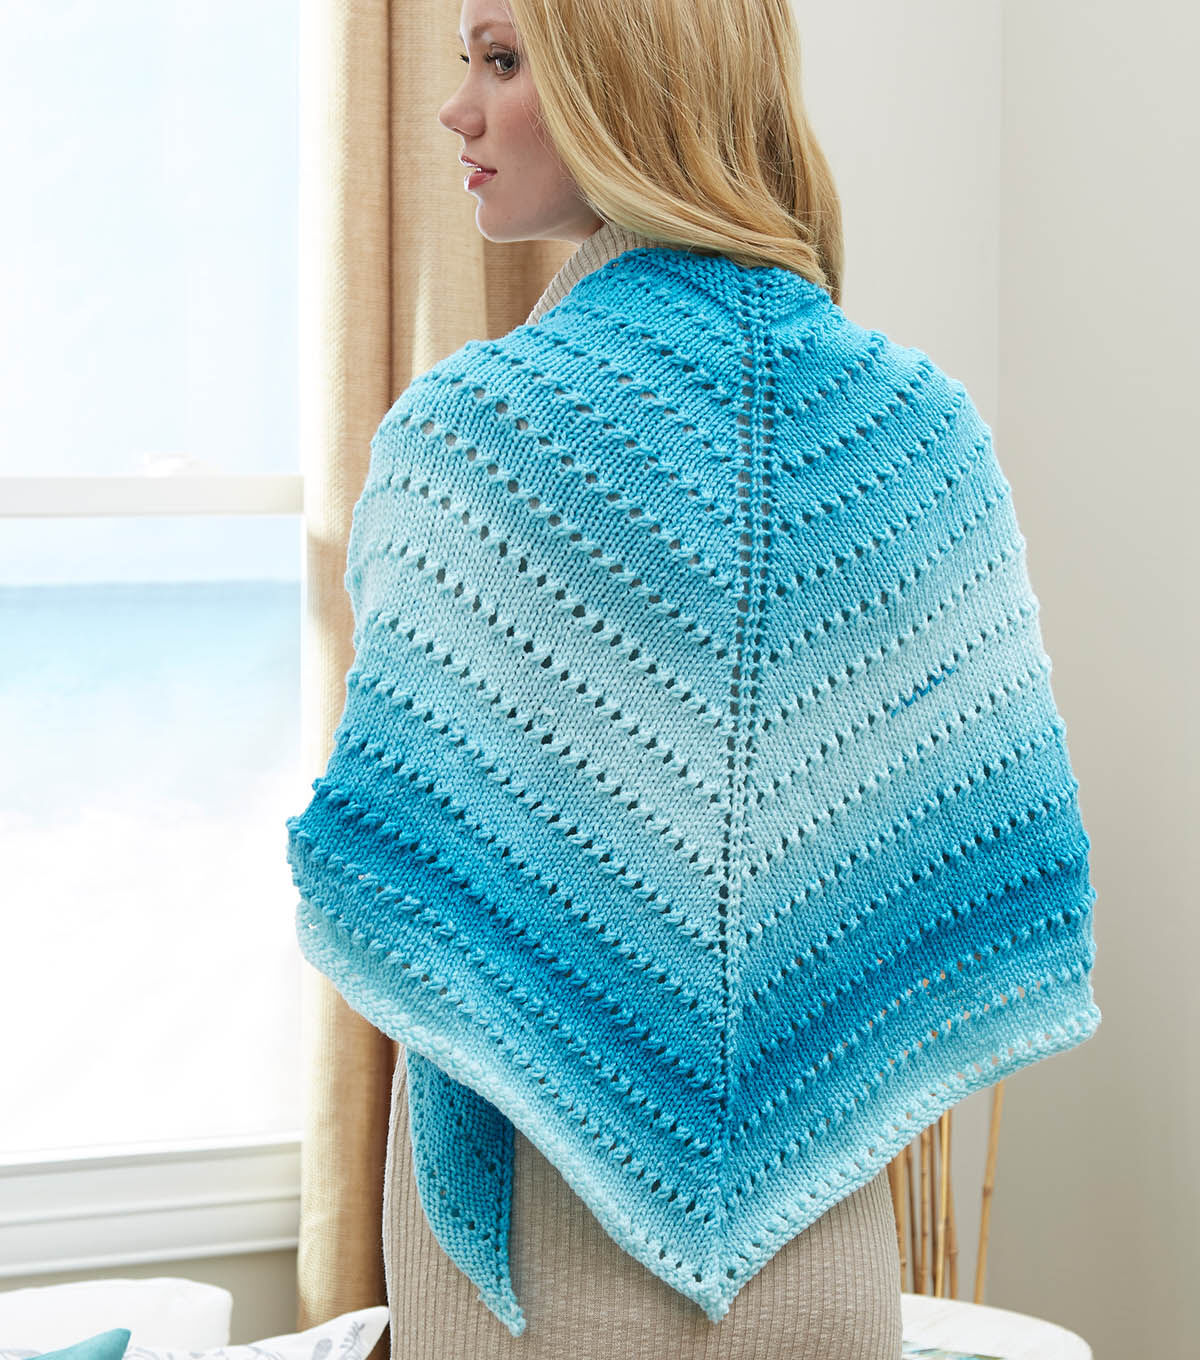 How To Make Knit A Simple Lace Triangle Shawl Online | JOANN